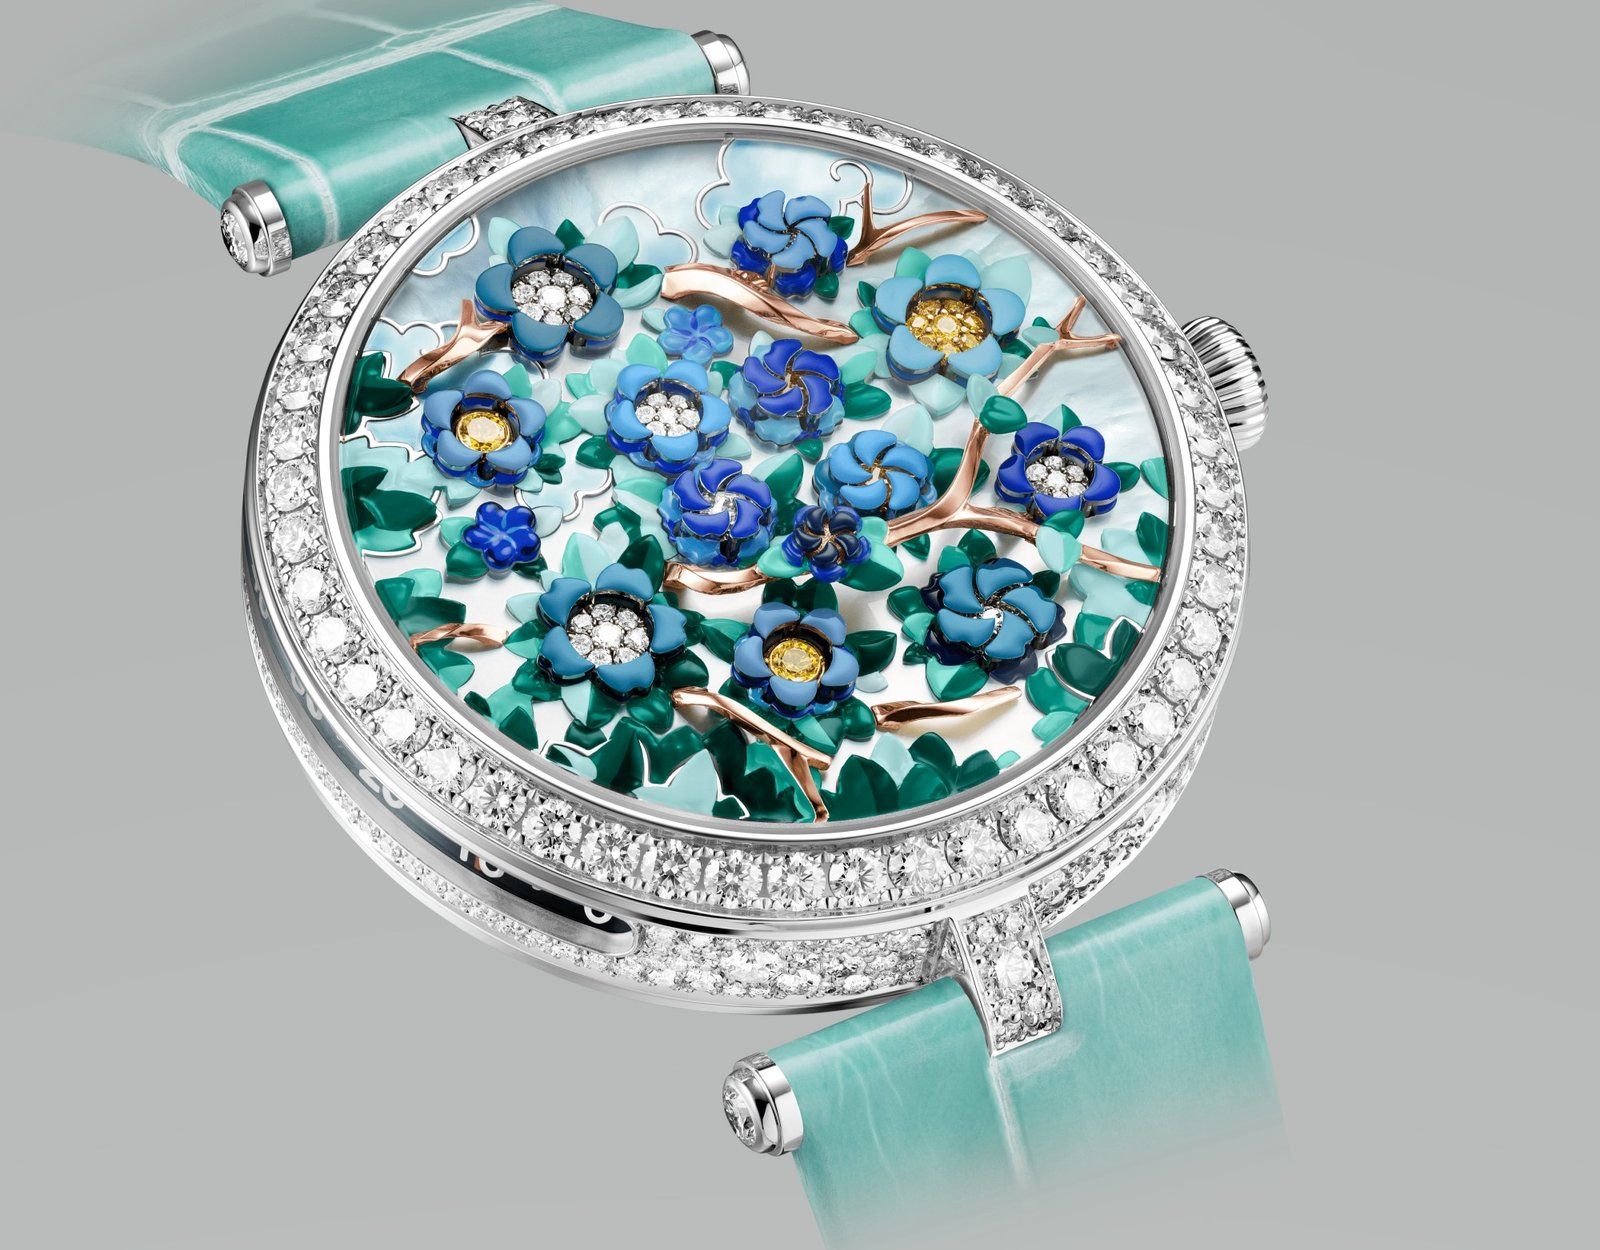 Lady Arpels Heures Florales watch, 38mm case in white gold, diamonds